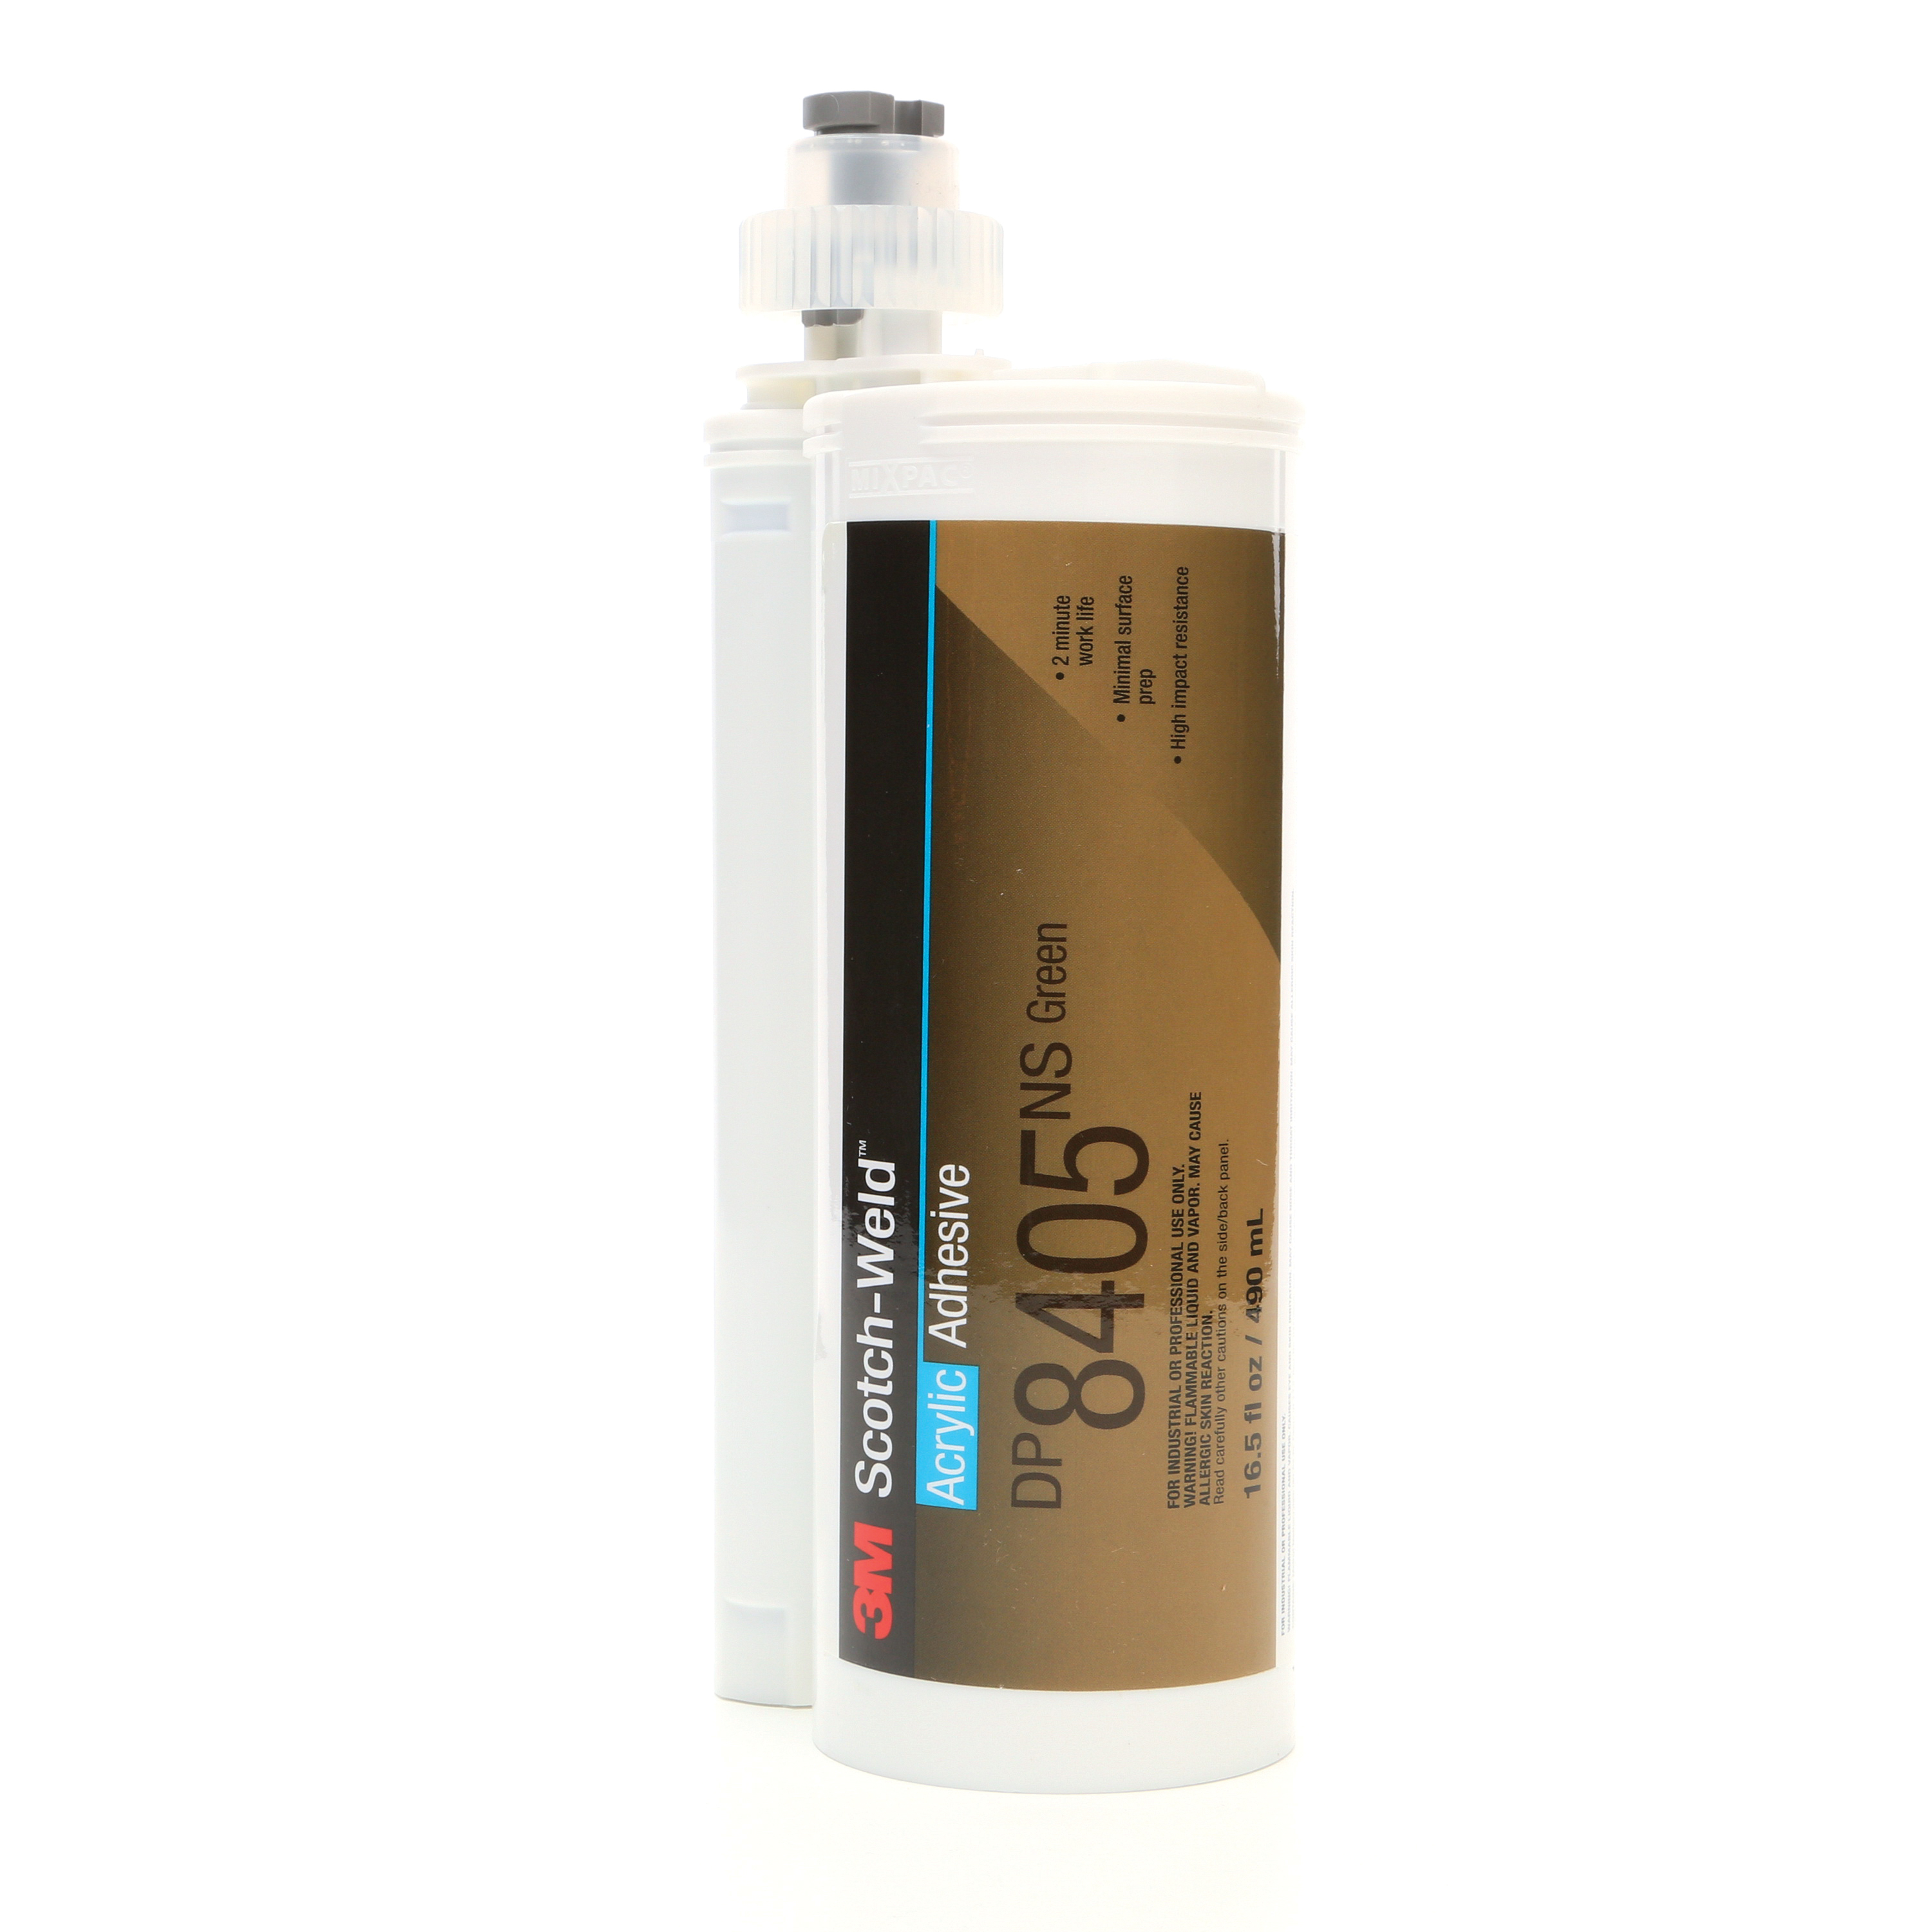 Scotch-Weld™ 051115-68964 2-Part Impact-Resistant Acrylic Adhesive, 490 mL Duo-Pak Cartridge, Part A: Blue/Part B: White, 24 hr at 73 deg F Curing